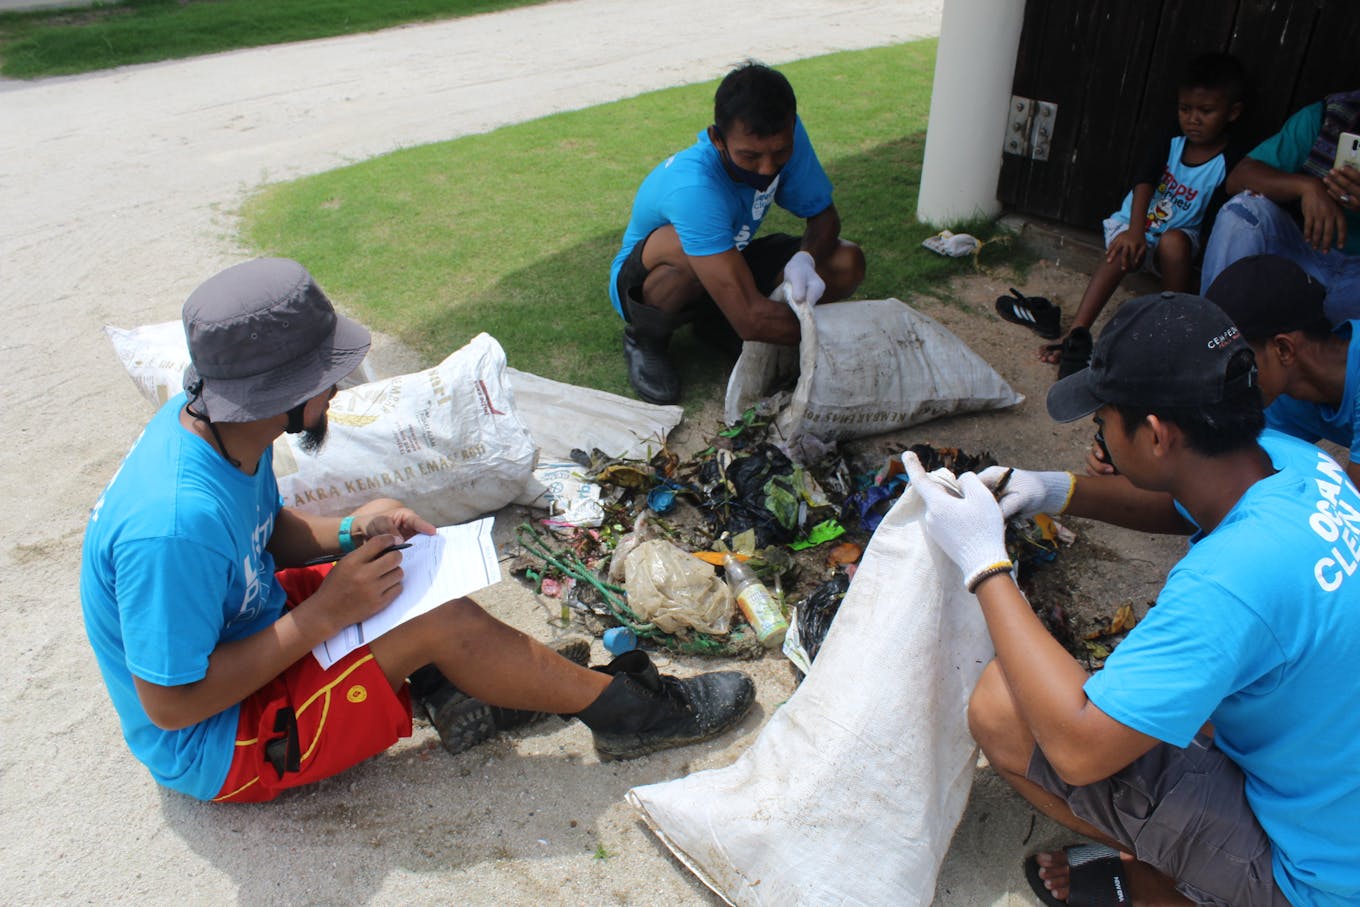 Workers weigh marine debris collected from a beach in Bintan, Indonesia. Image: Seven Clean Seas